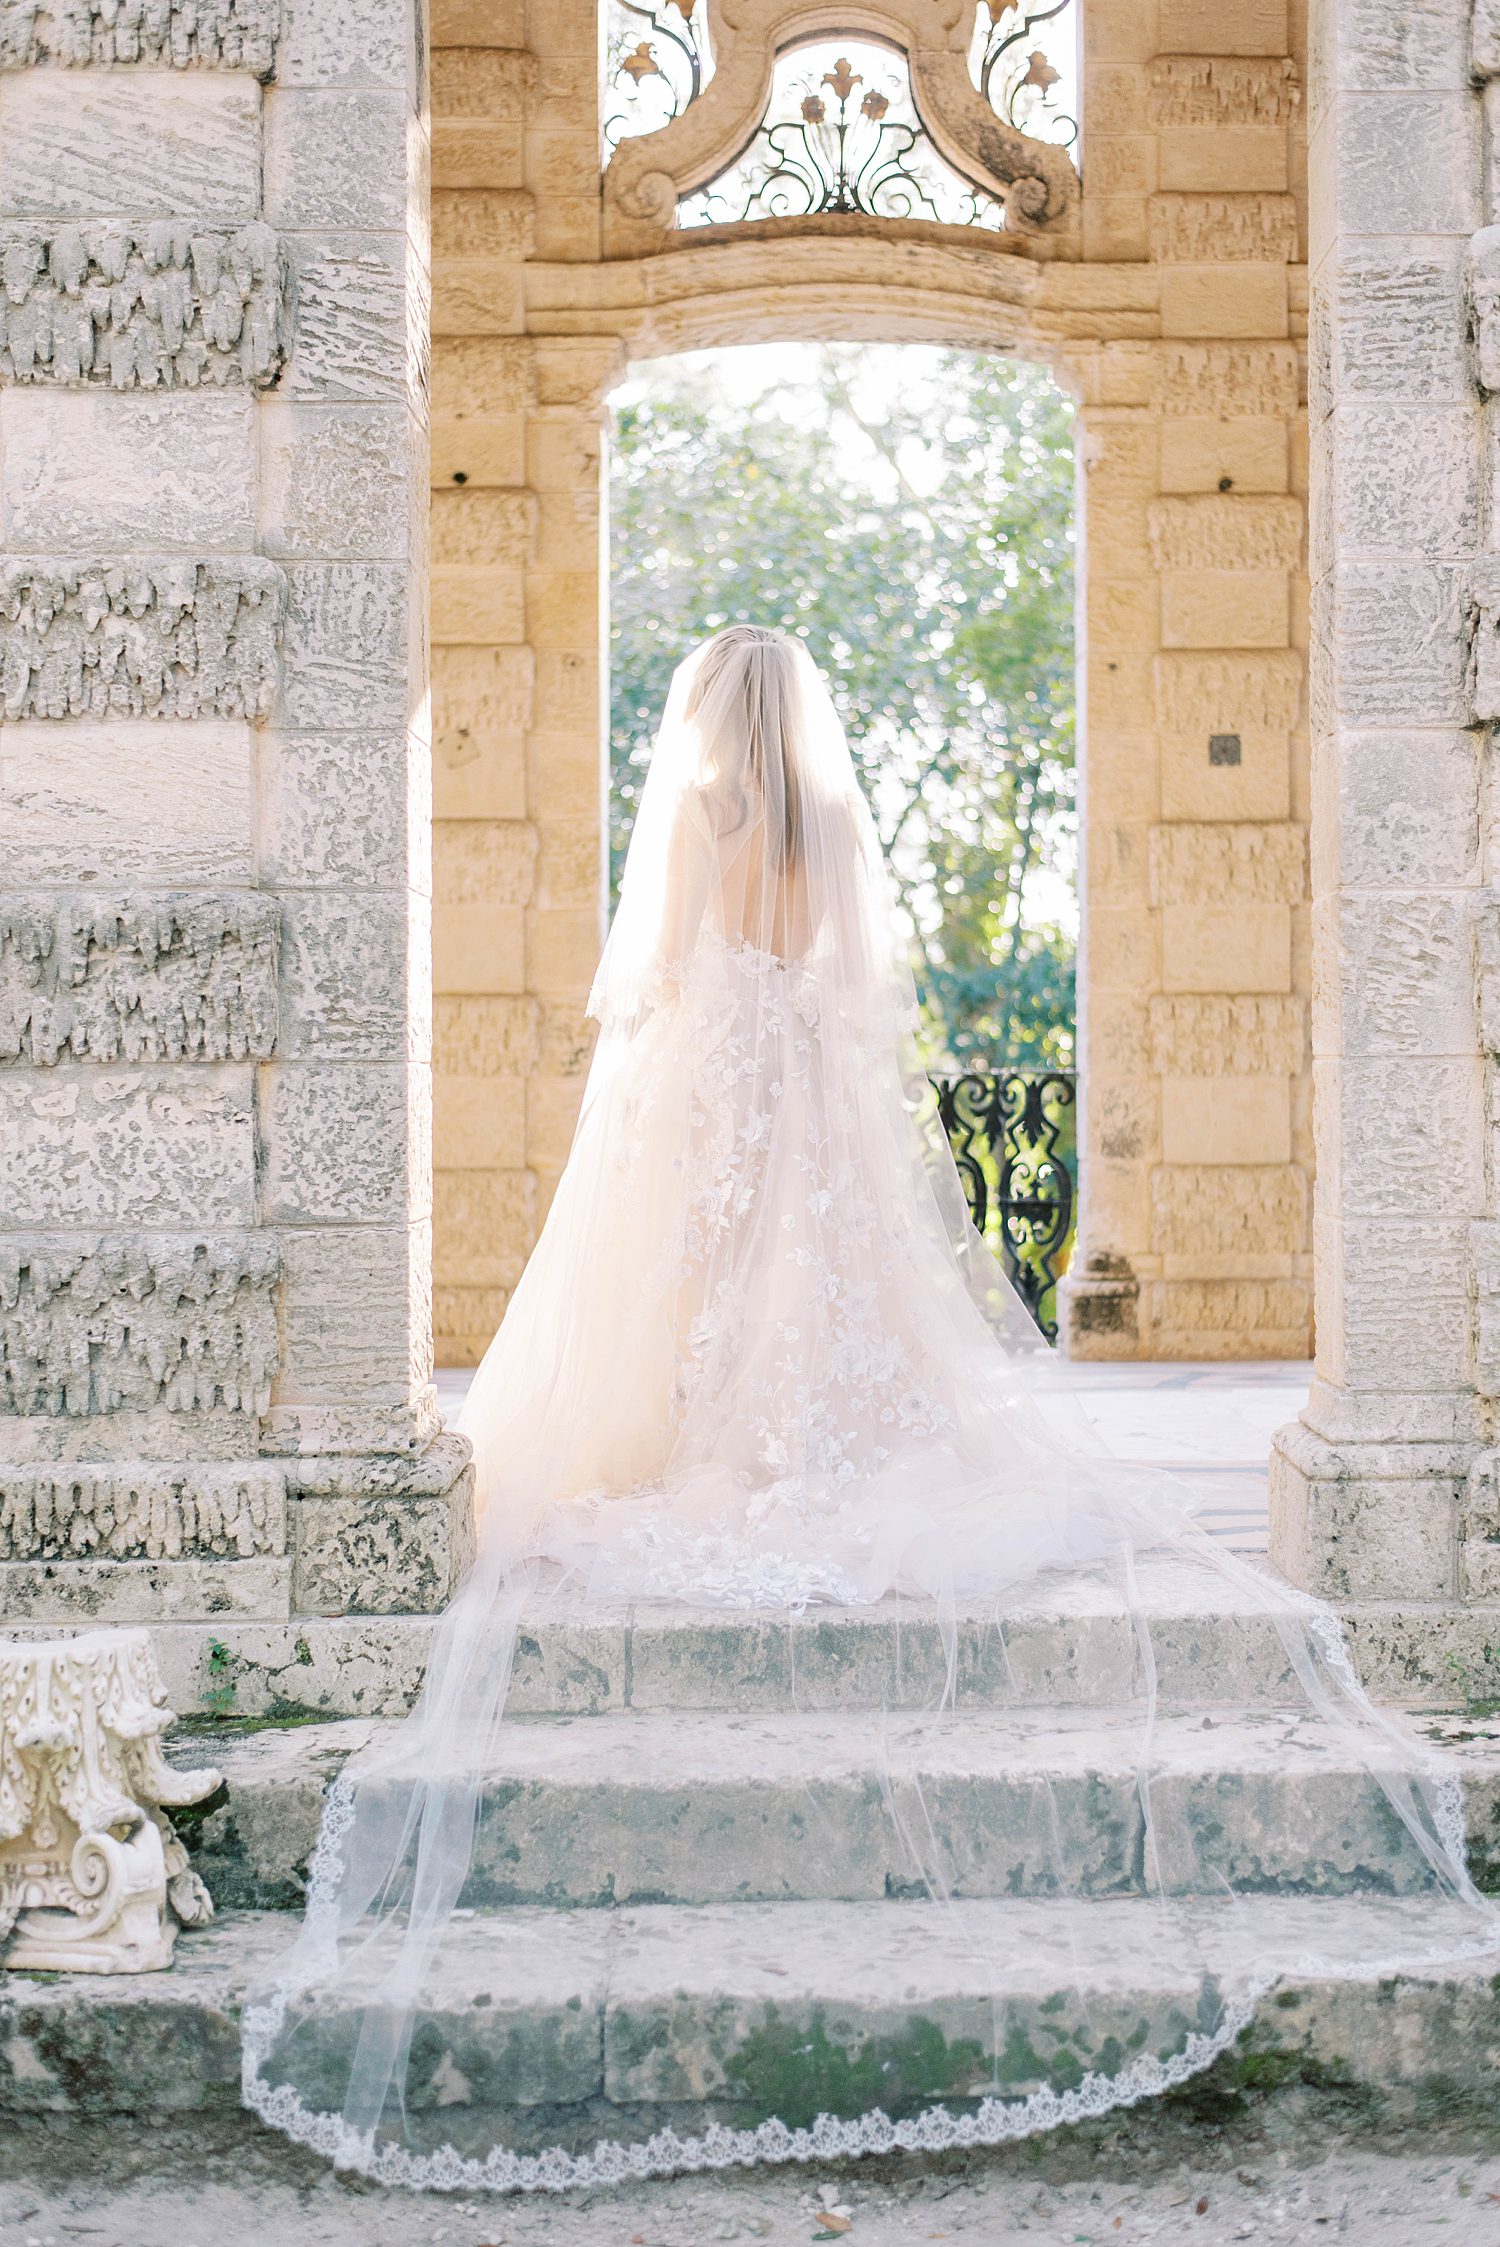 bride stands in stone arbor with veil draped behind her